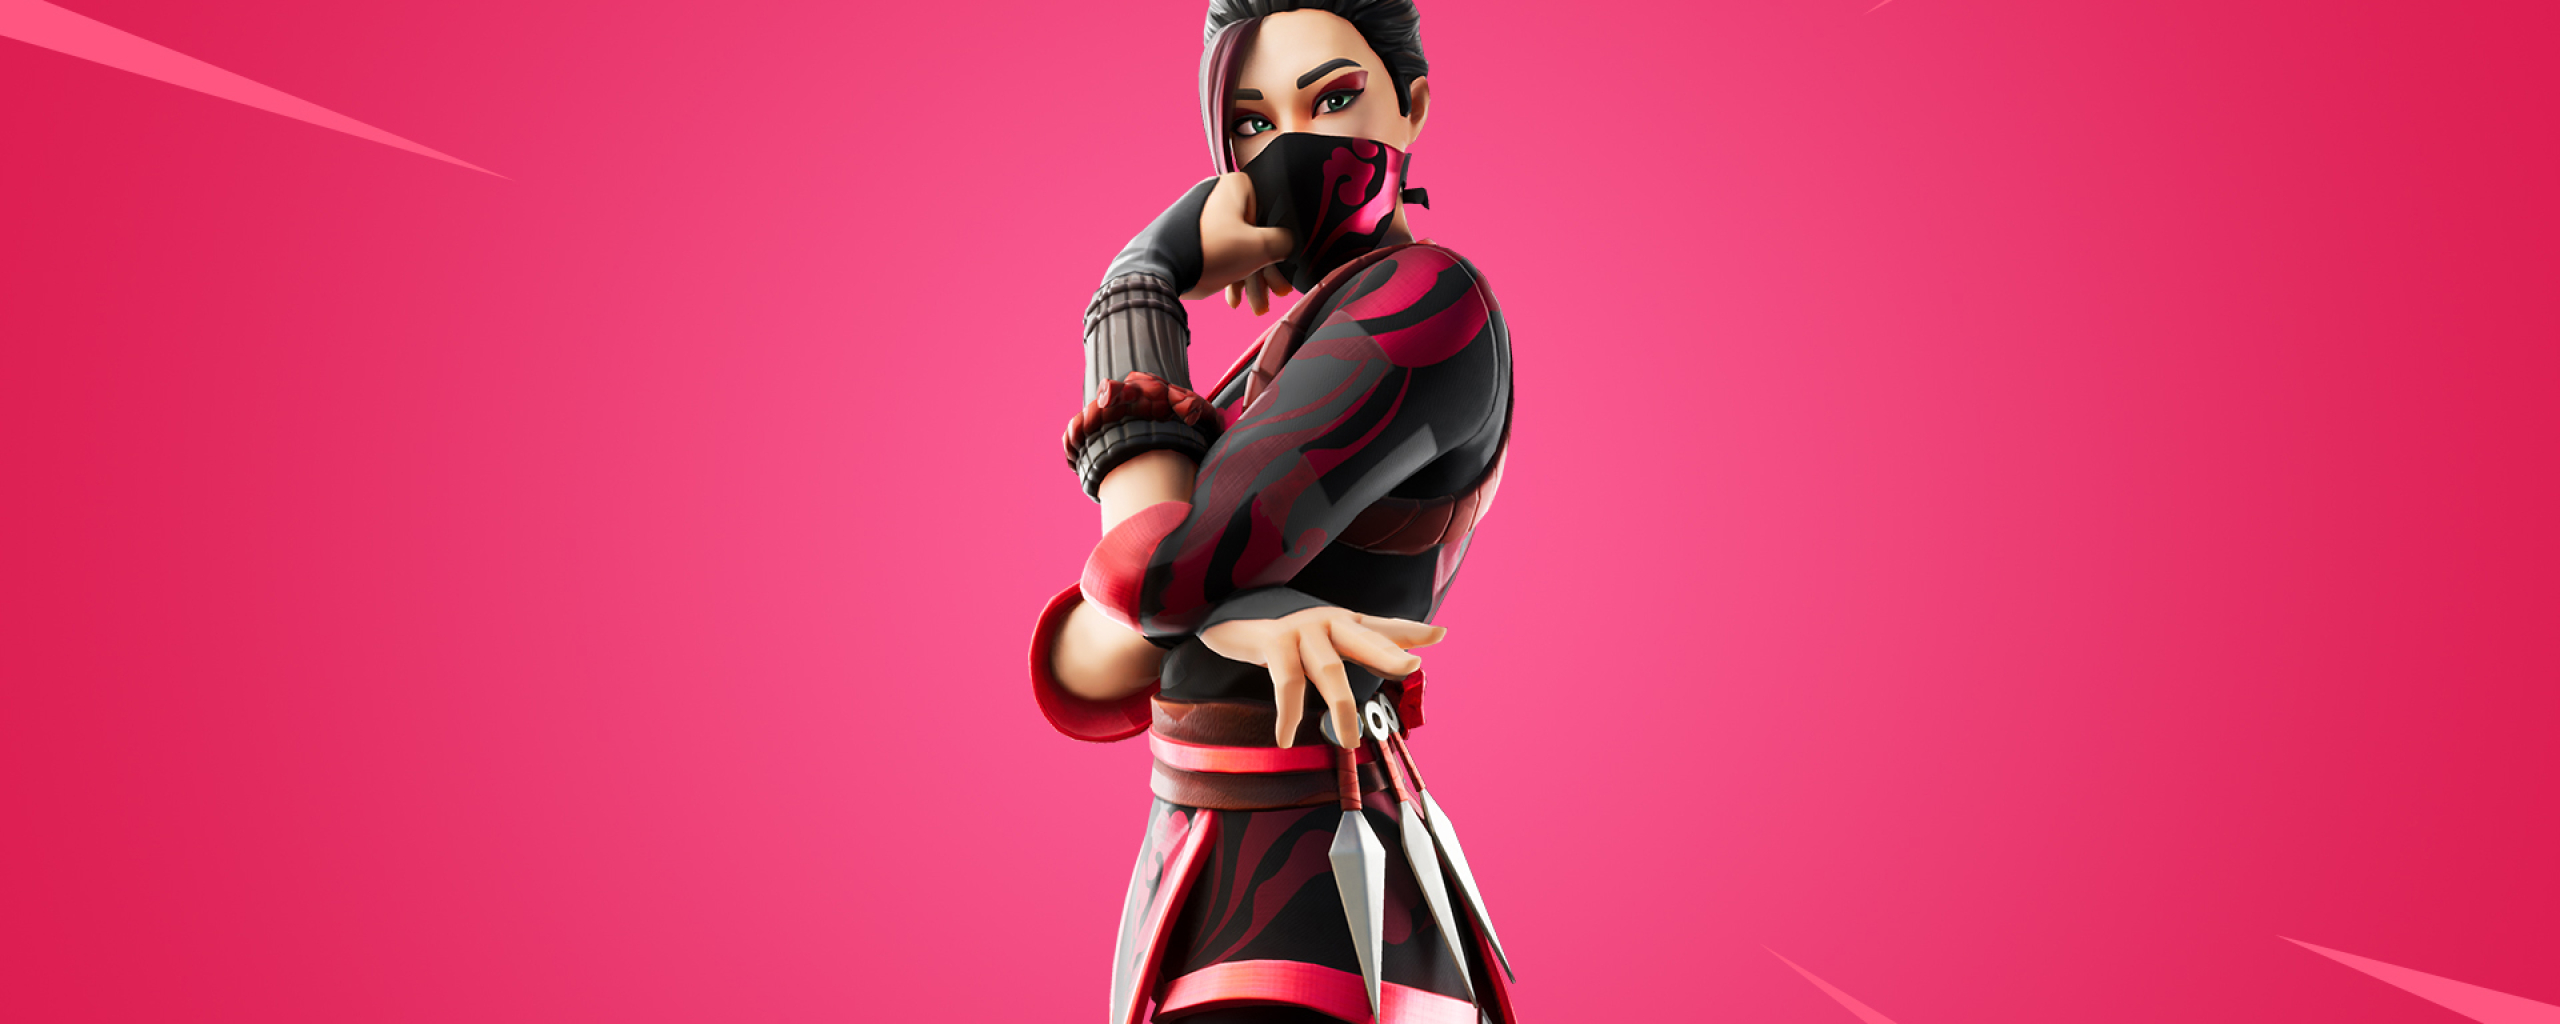 2560x1024 Red Jade Skin Fortnite Outfit 2560x1024 Resolution Wallpaper ...